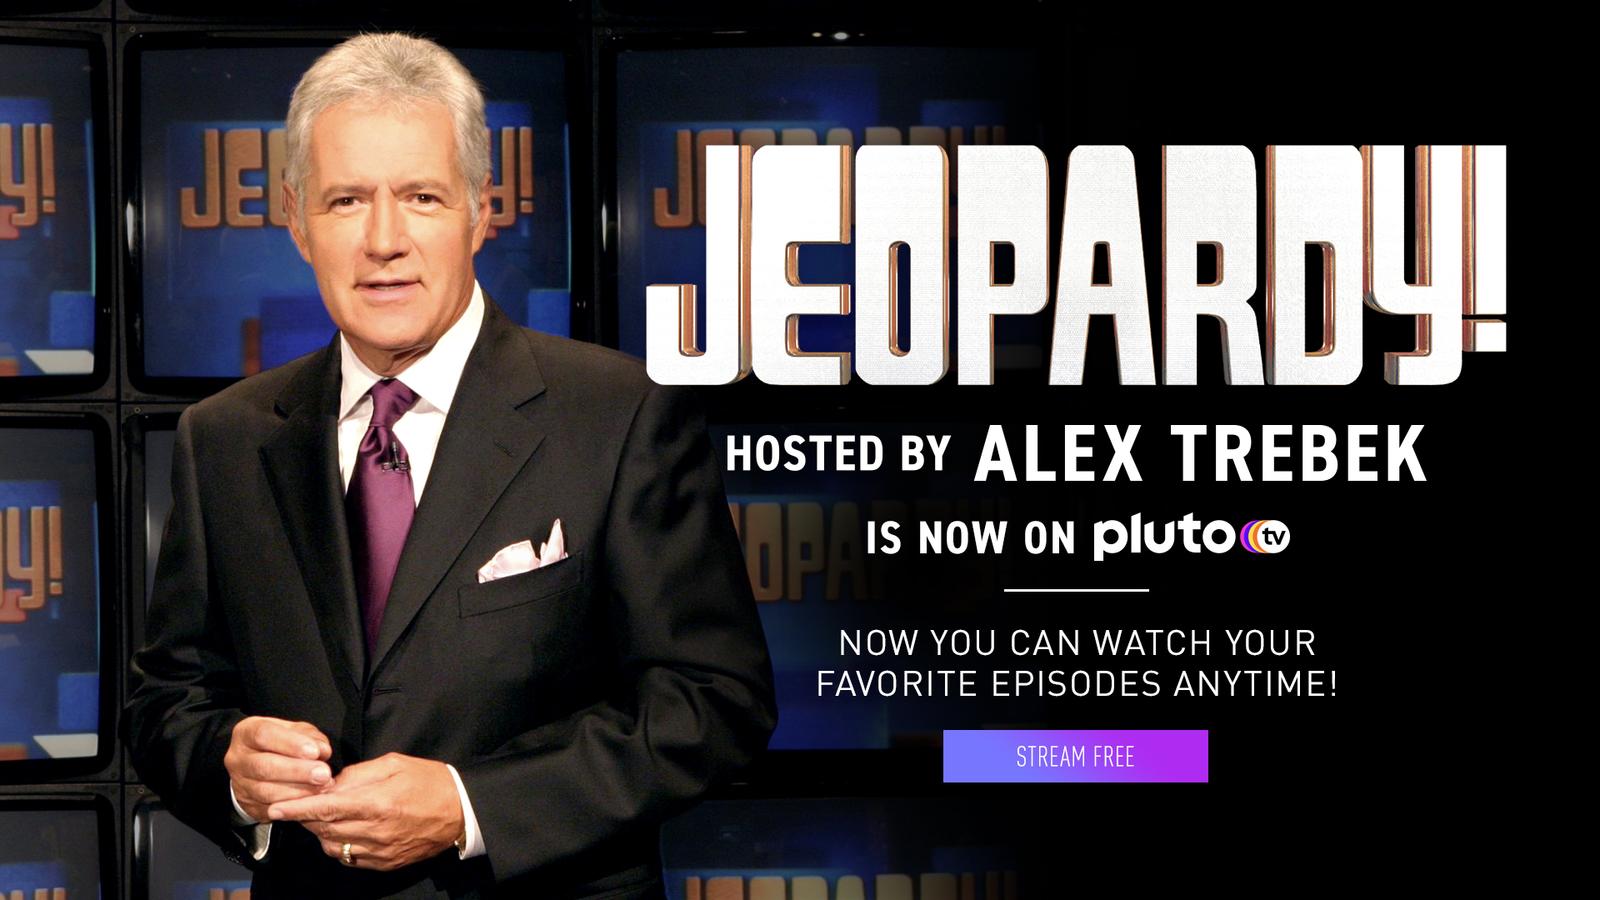 Jeopardy! hosted by Alex Trebek is now on Pluto TV